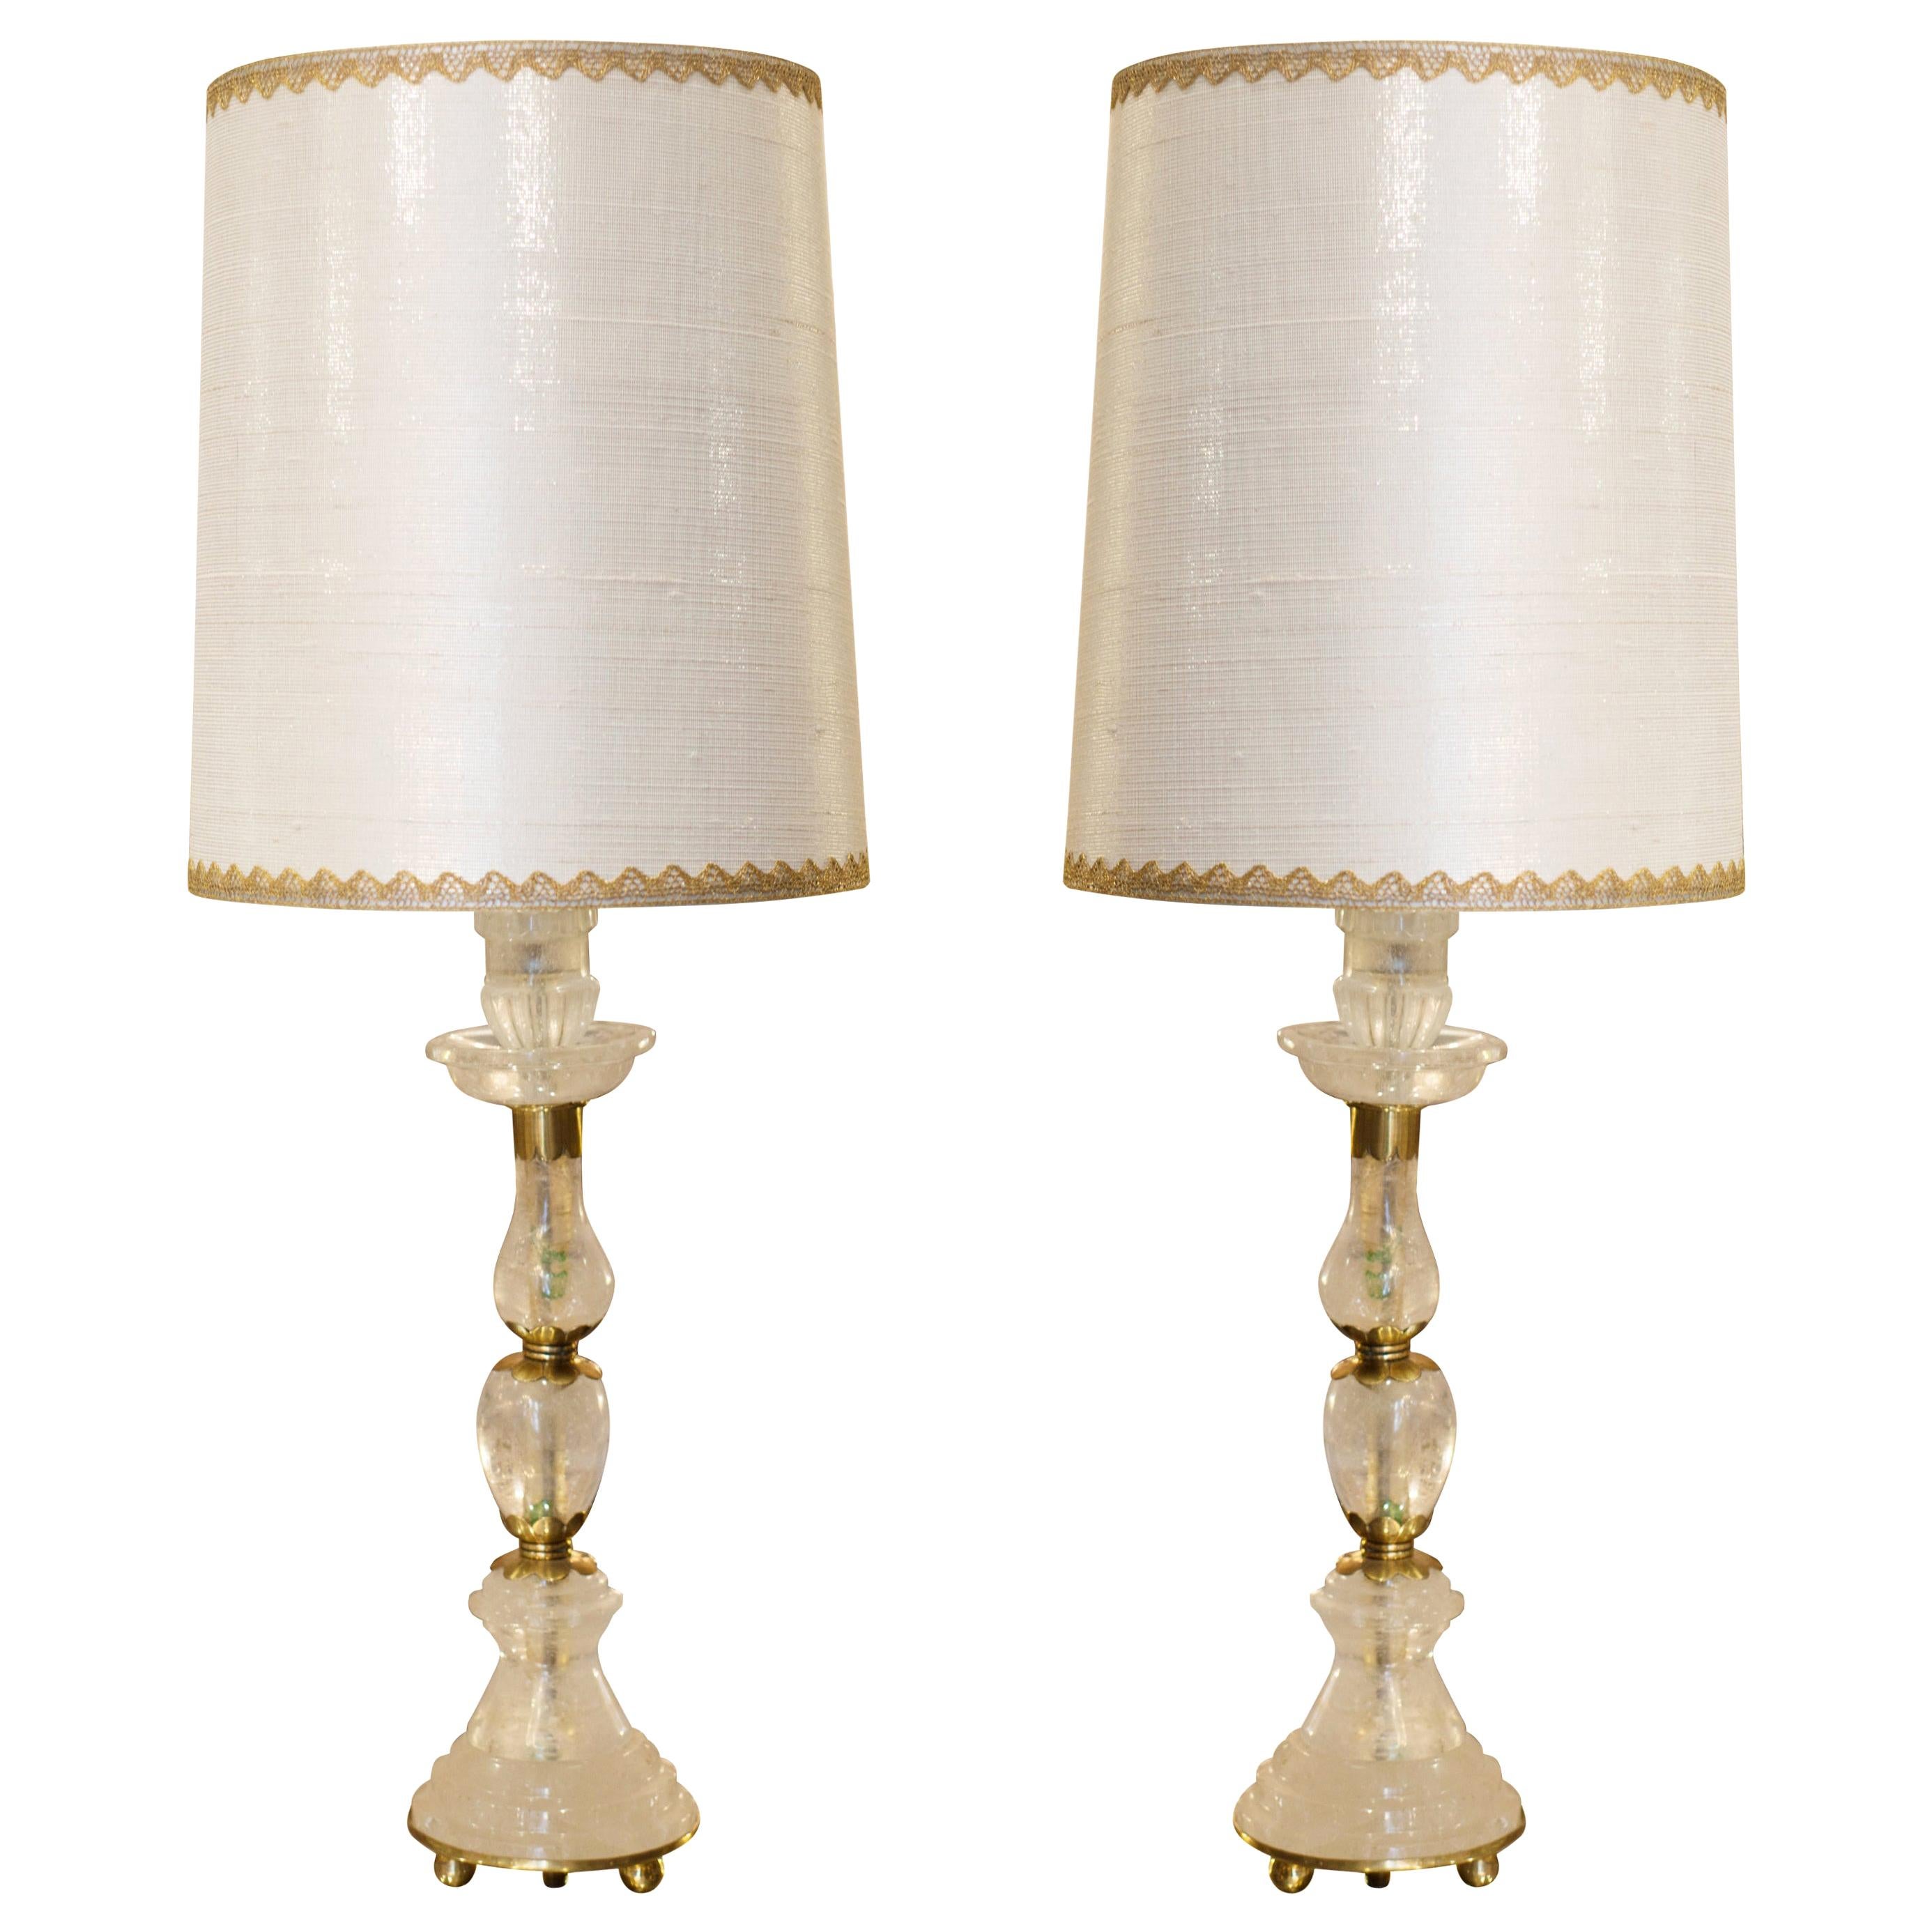 Contemporary Pair of White Rock Crystal and Bronze Lamps with Custom Silk Shades